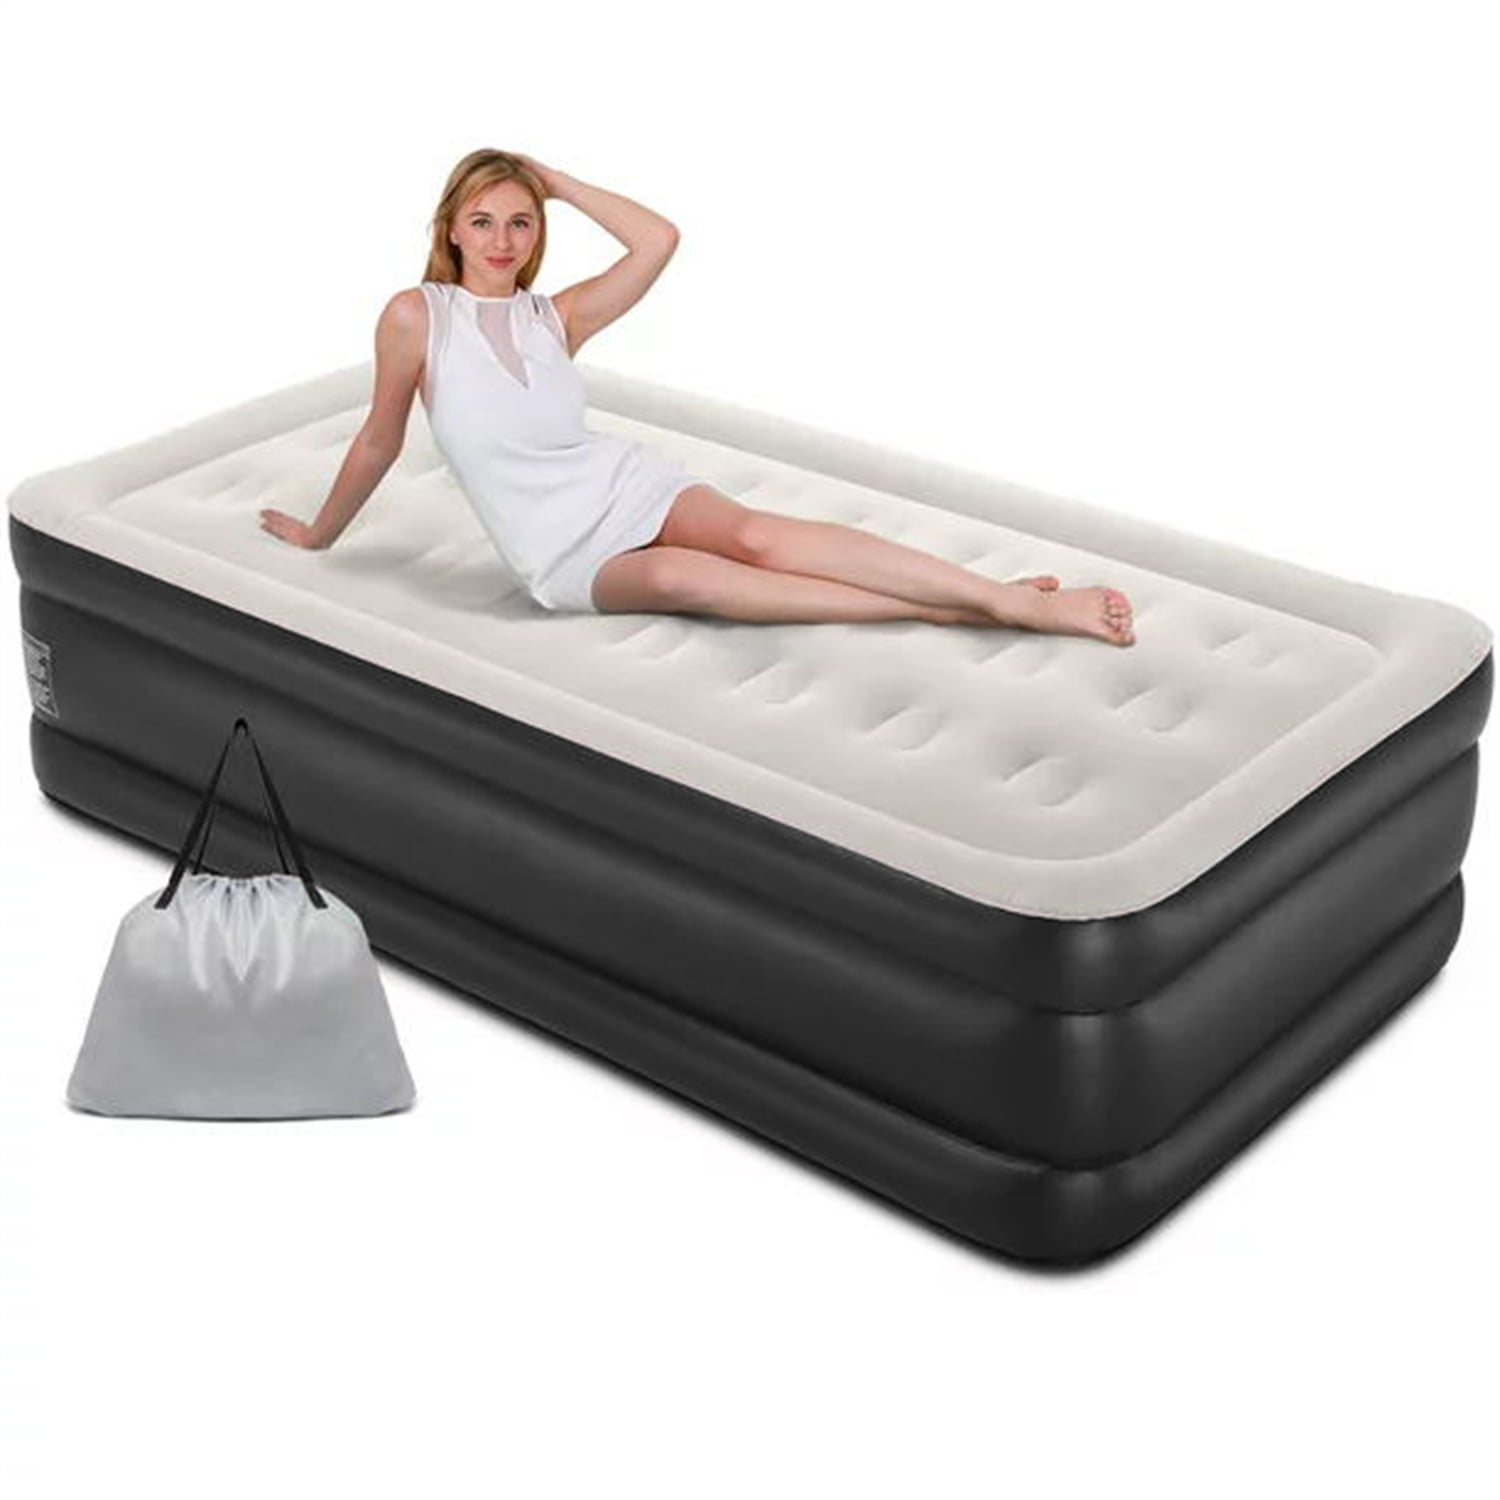 AeroBed Luxury Pillow Top 16-Inch Queen Air Mattress Inflatable Bed New 